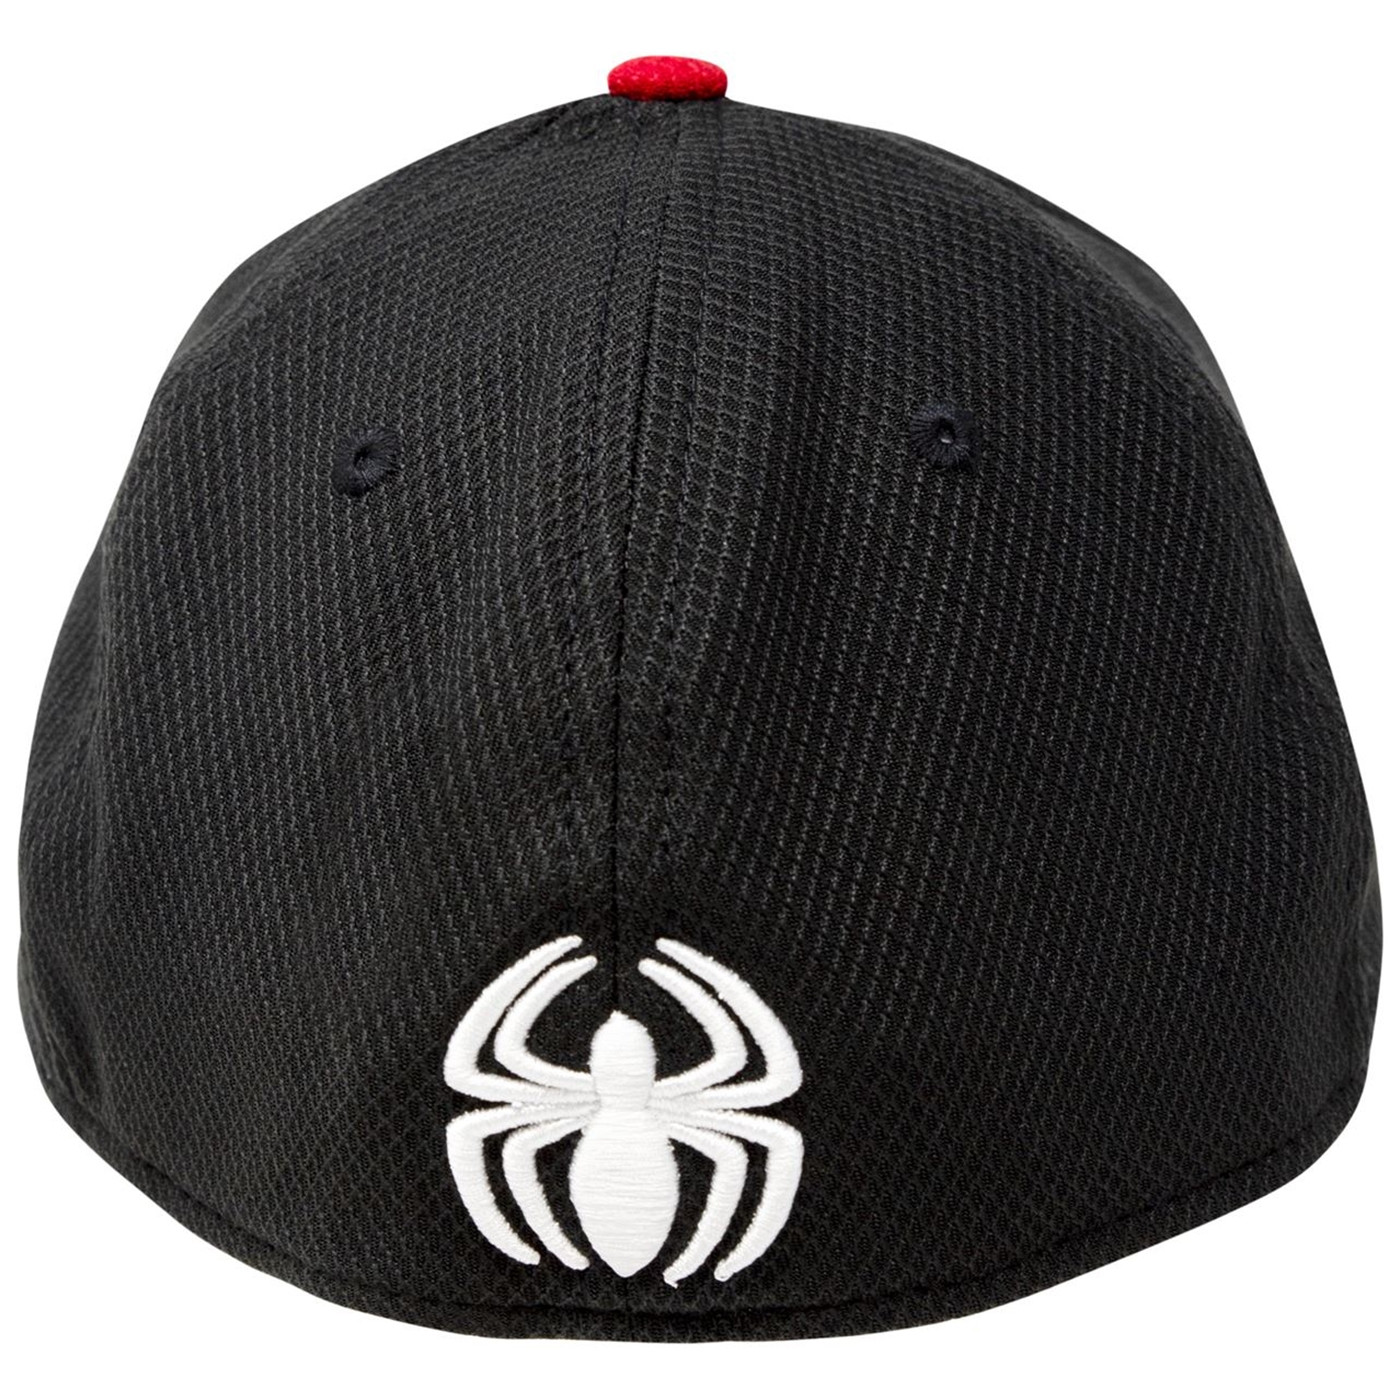 Spider-Man Stealth Suit Armor New Era 39Thirty Flex Fitted Hat